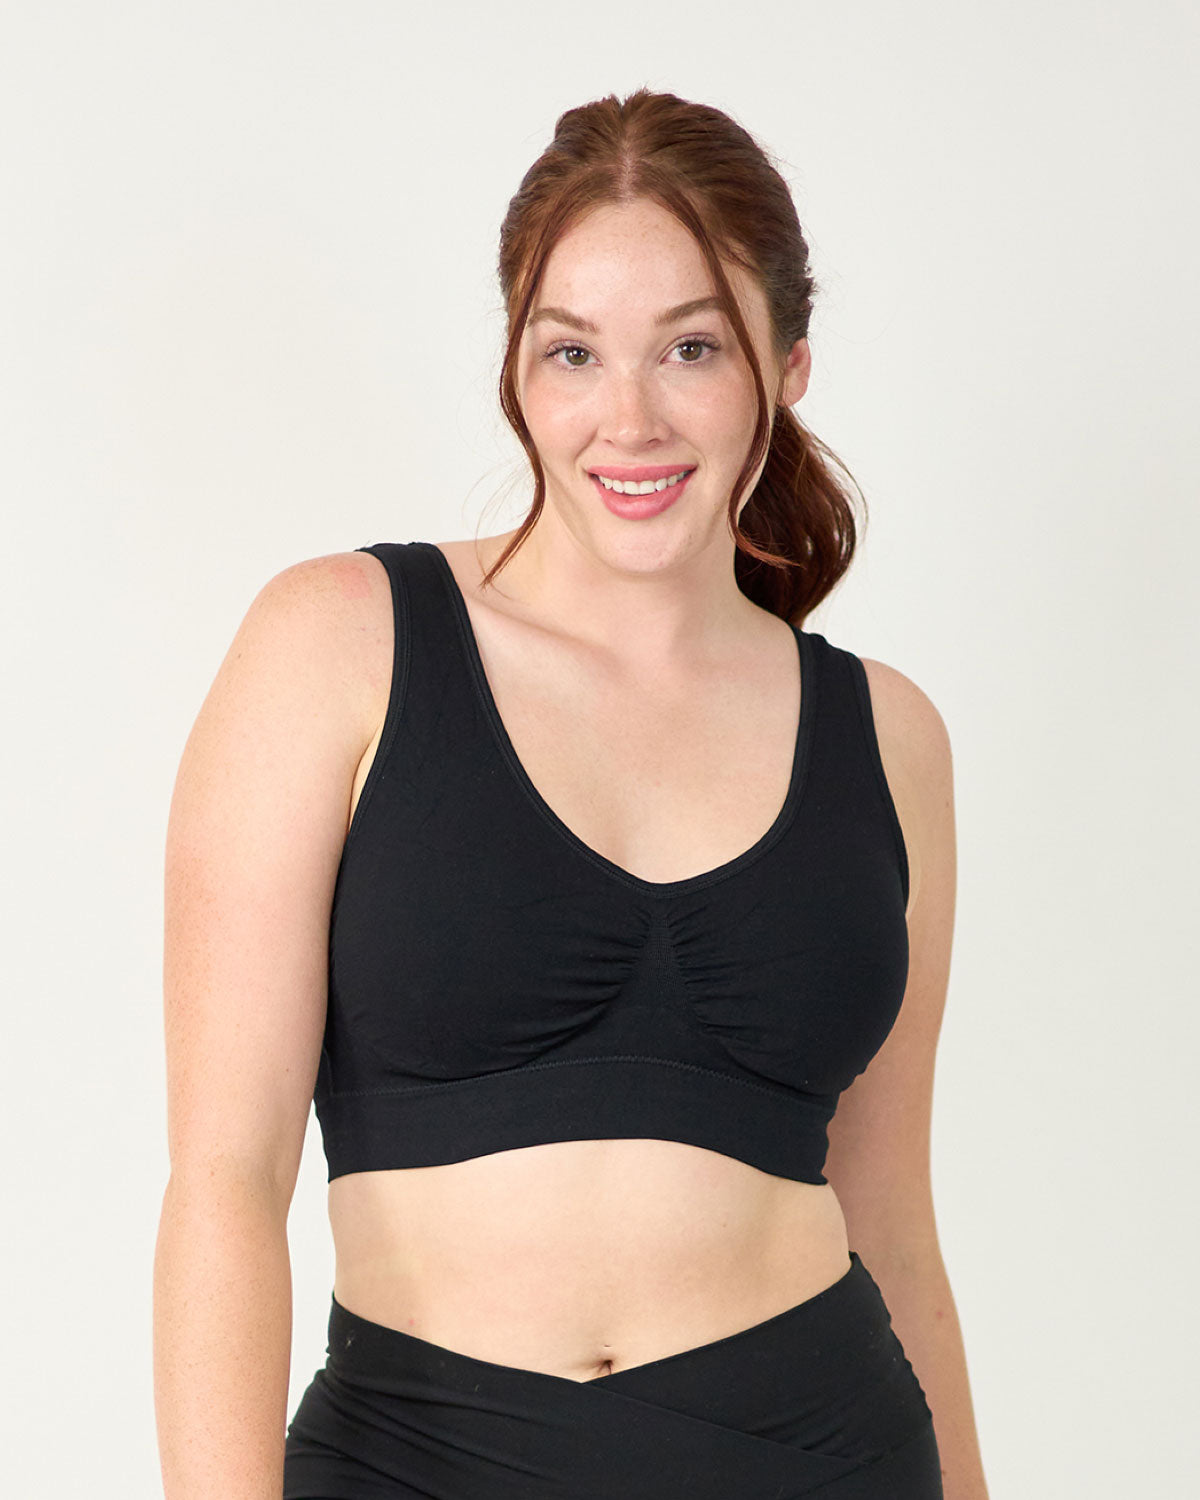 Coobie Seamless Bras are the most comfortable bra EVER!